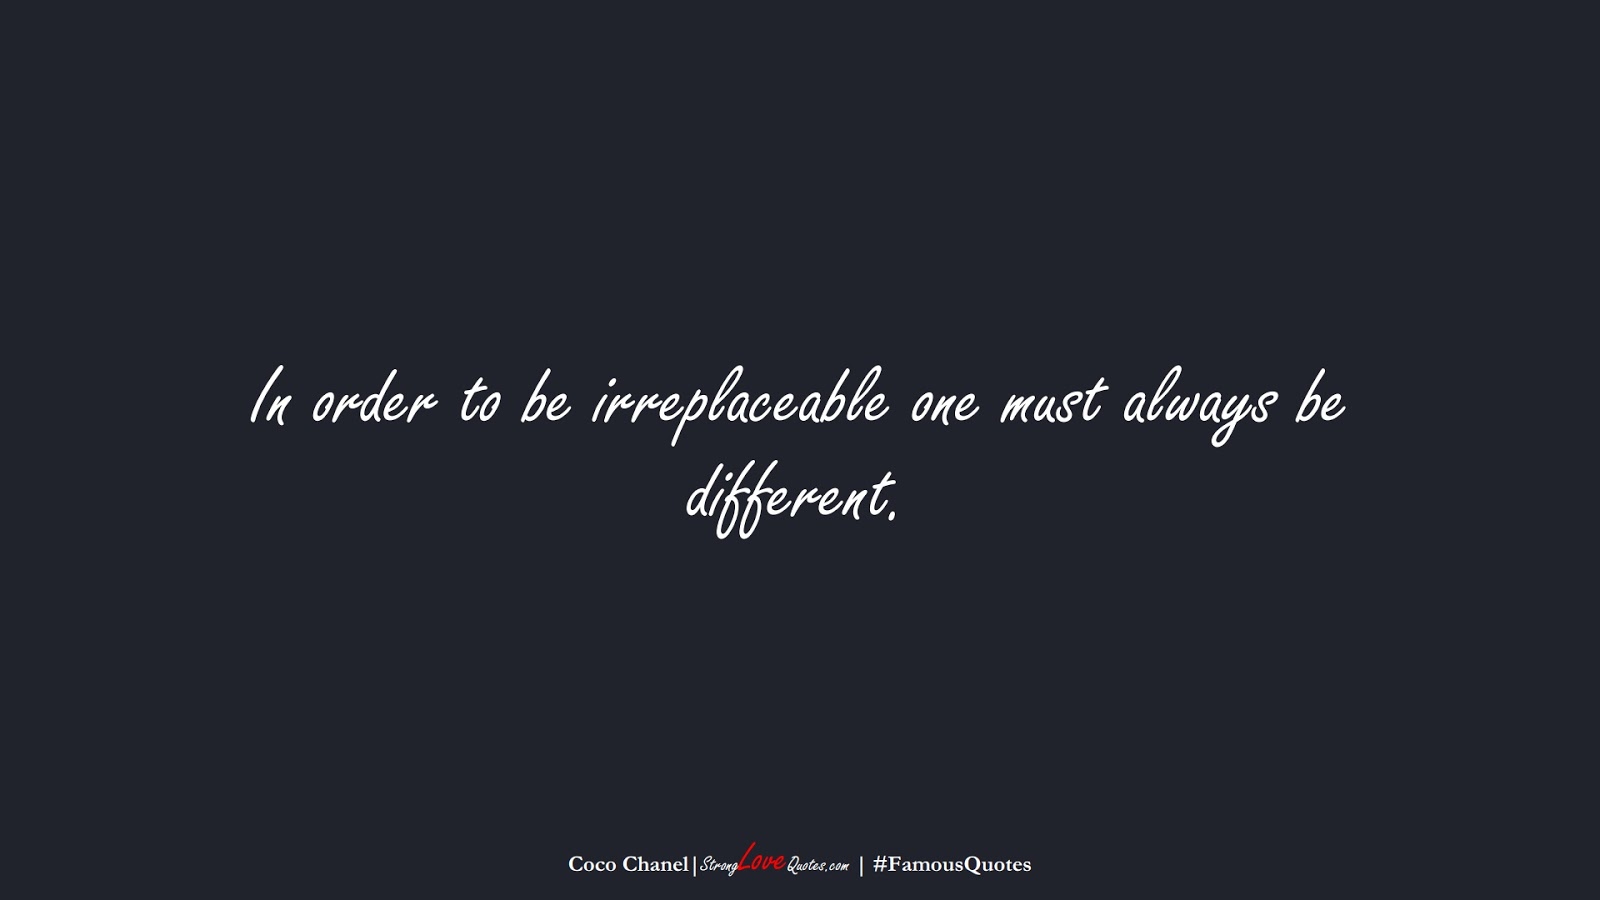 In order to be irreplaceable one must always be different. (Coco Chanel);  #FamousQuotes